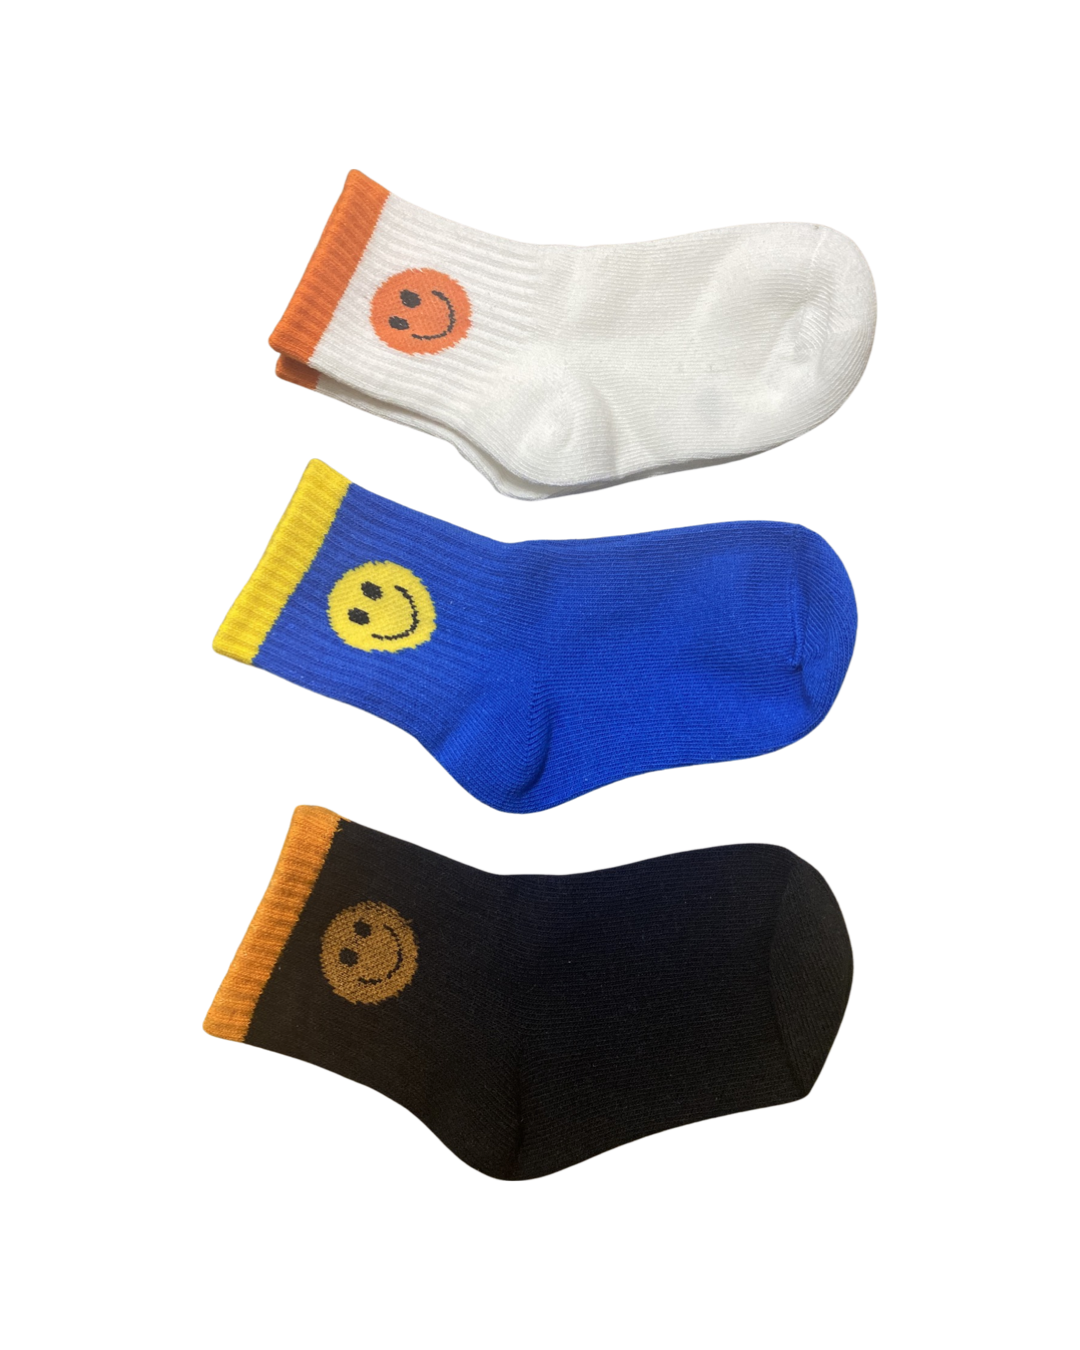 Graphic Socks (Happy Face), Toddler Size: White (sm)